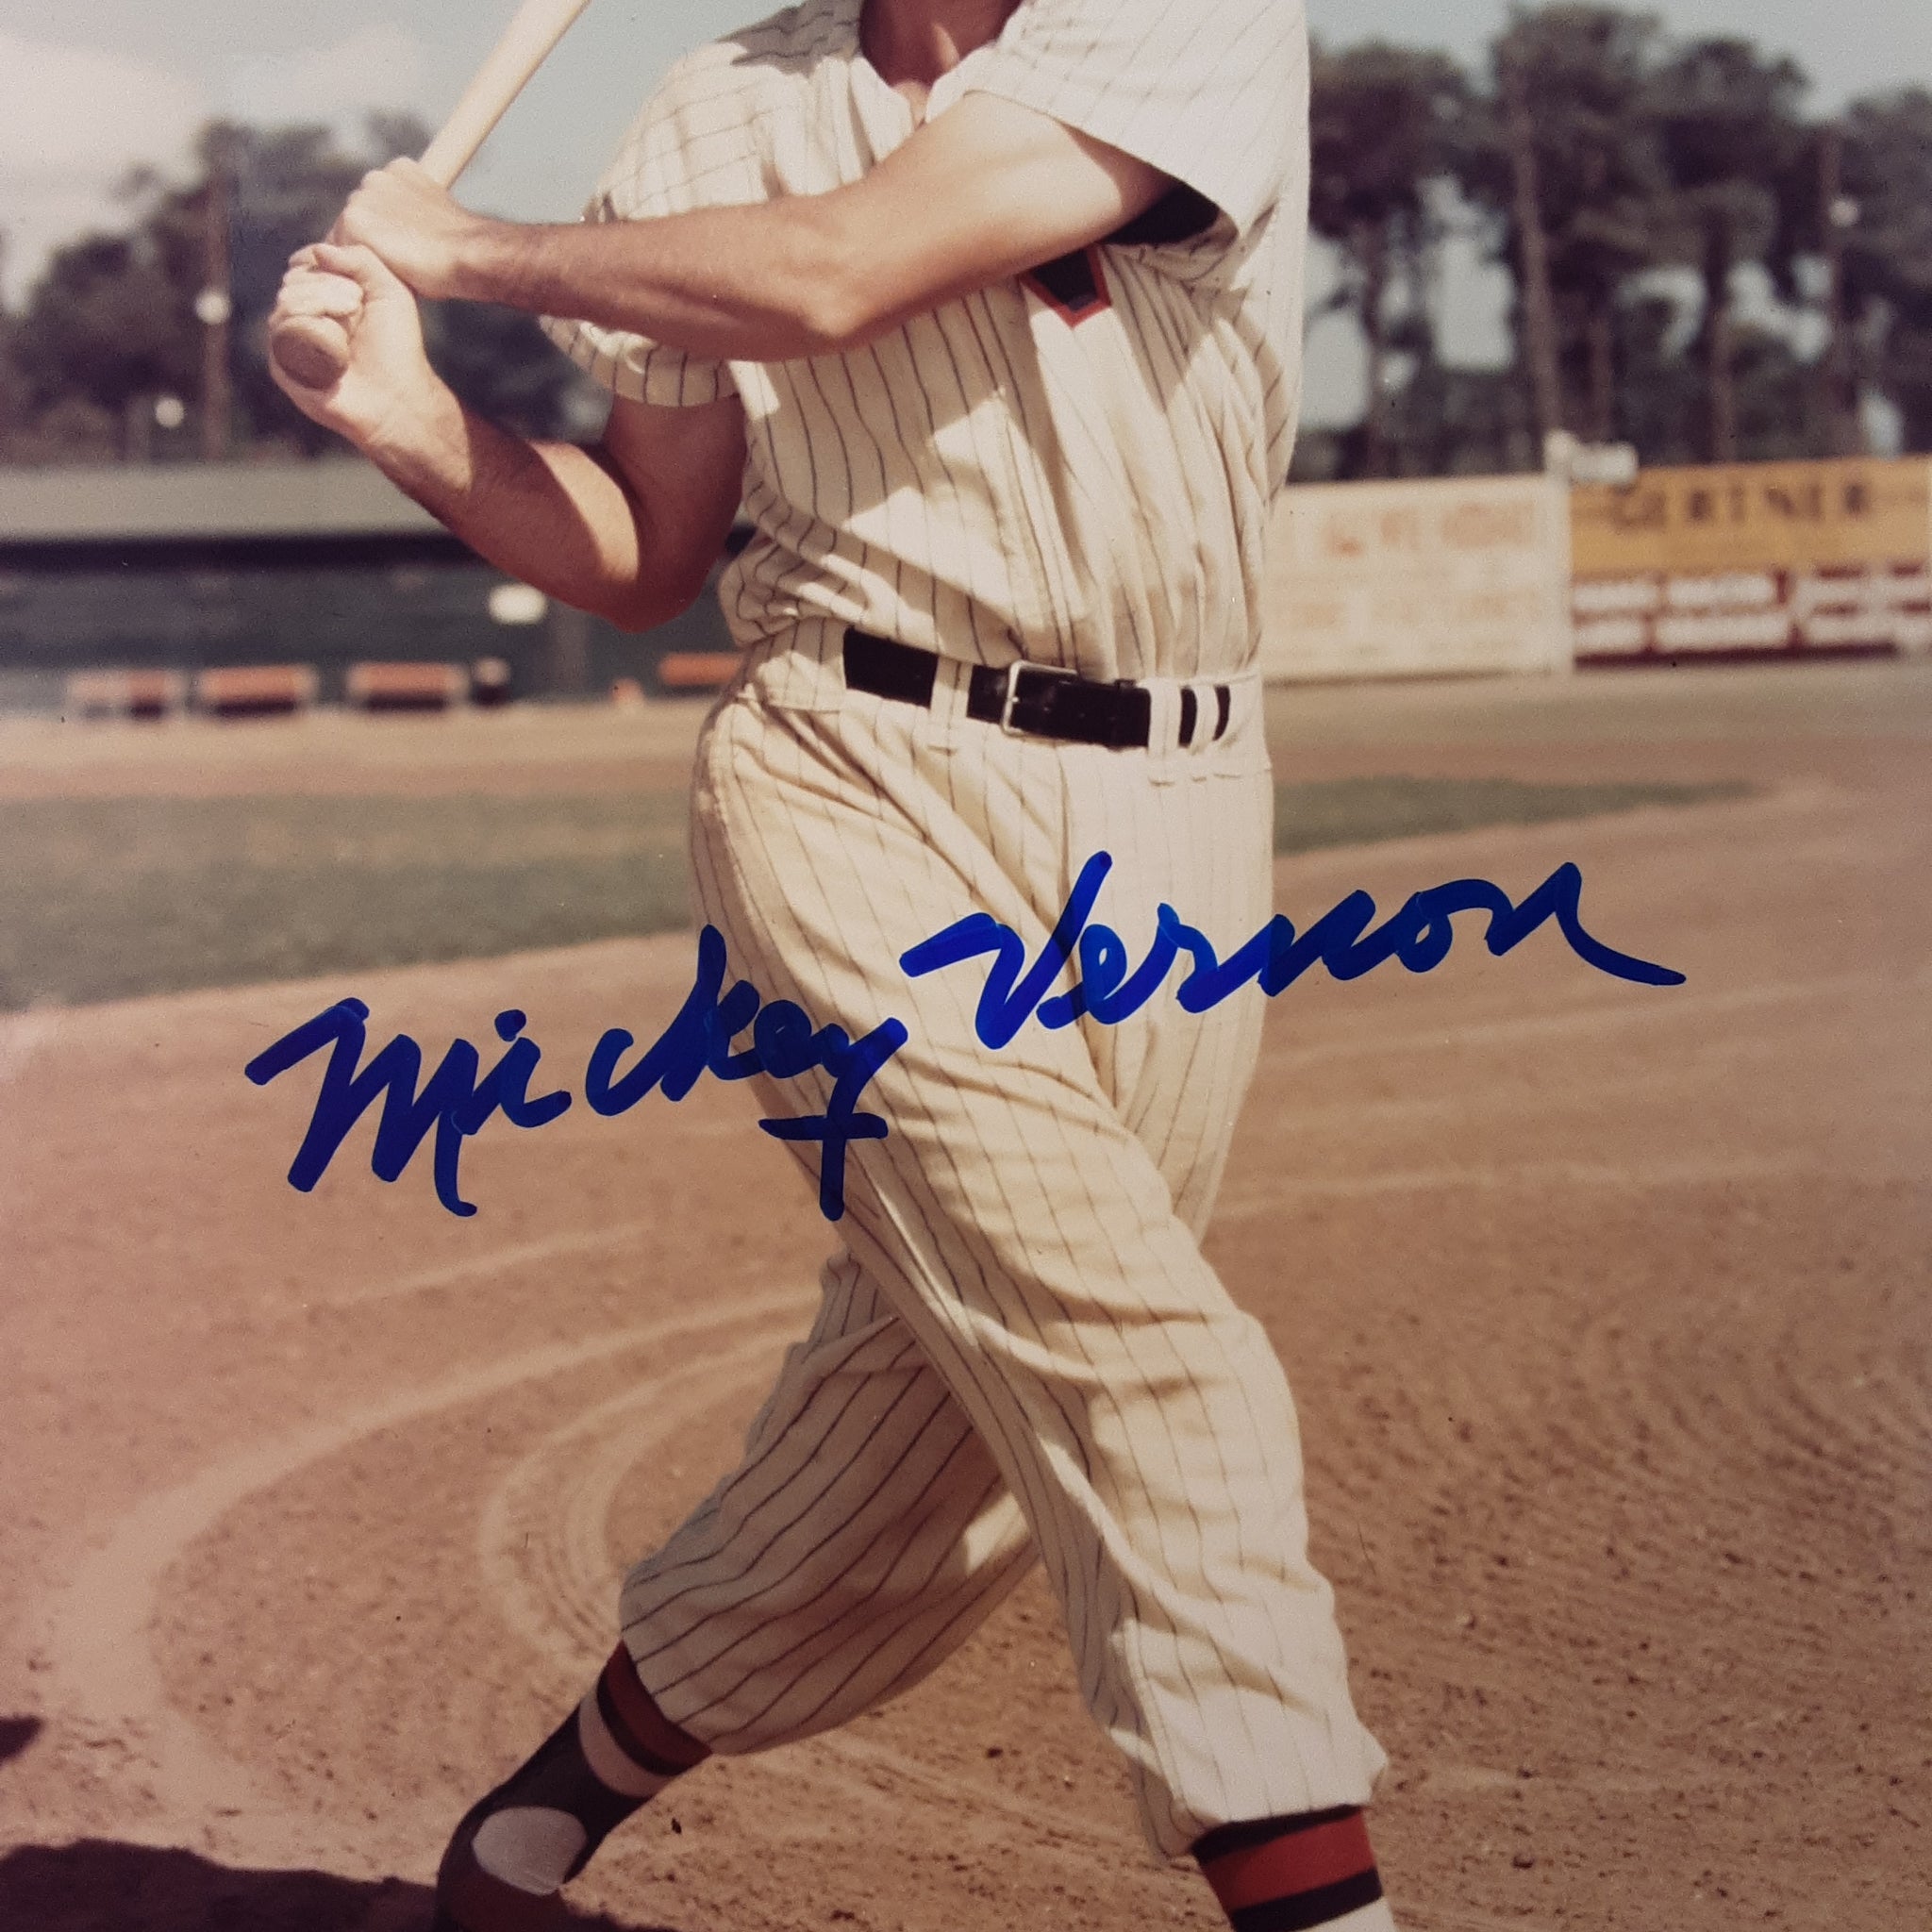 Mickey Vernon Authentic Signed 8x10 Photo Autographed PSA.